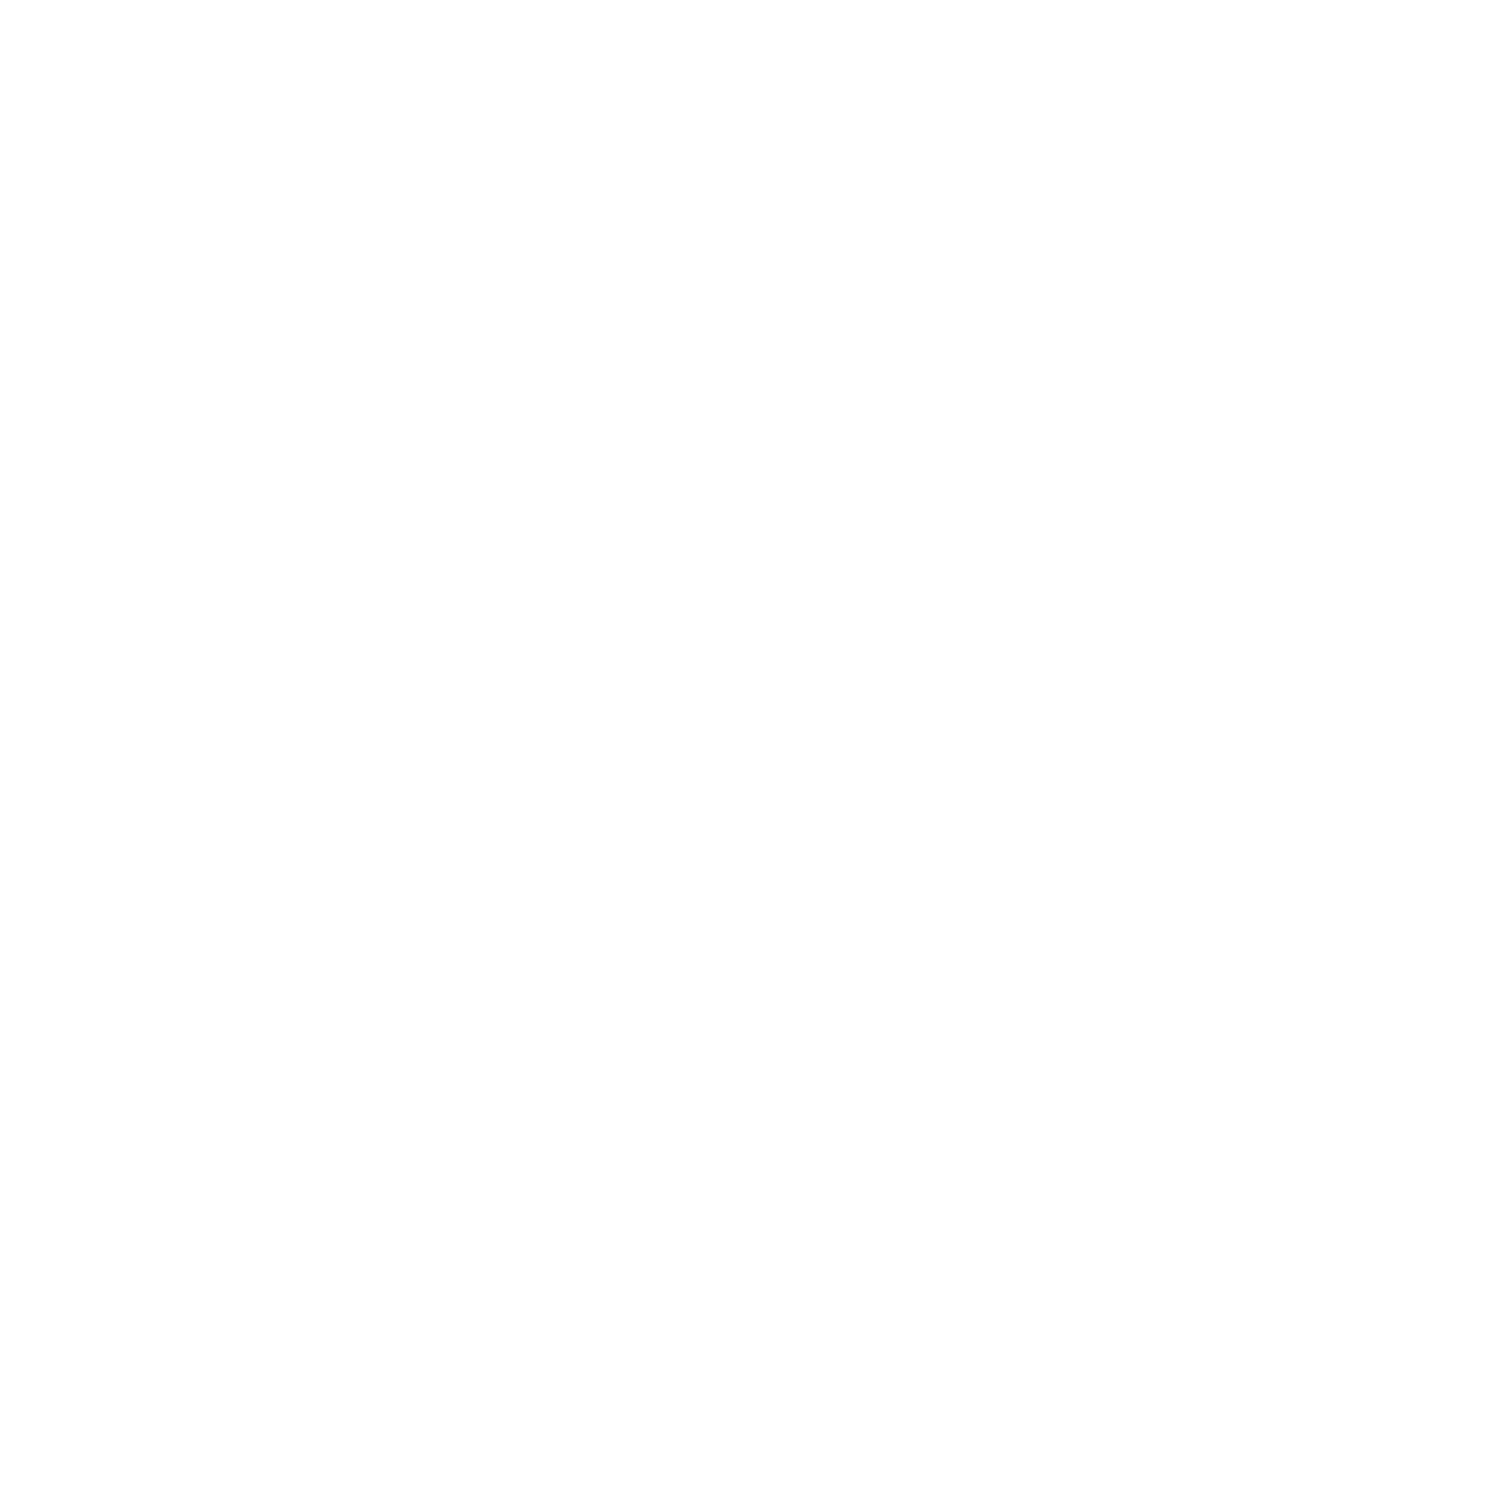 NYCCAL - It's More Than A Game